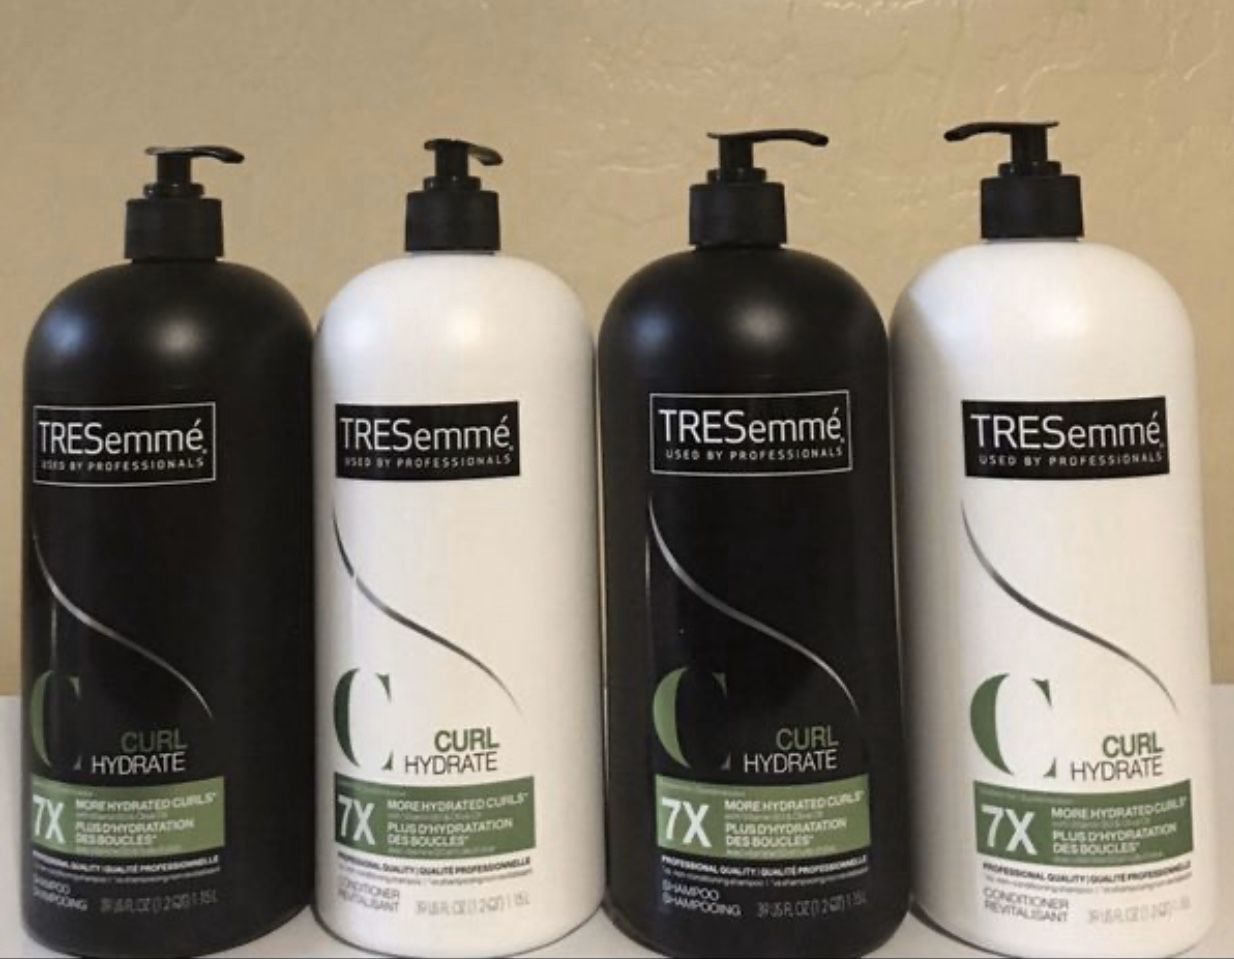 Tresemme (39 oz) Pump! $12 for all!